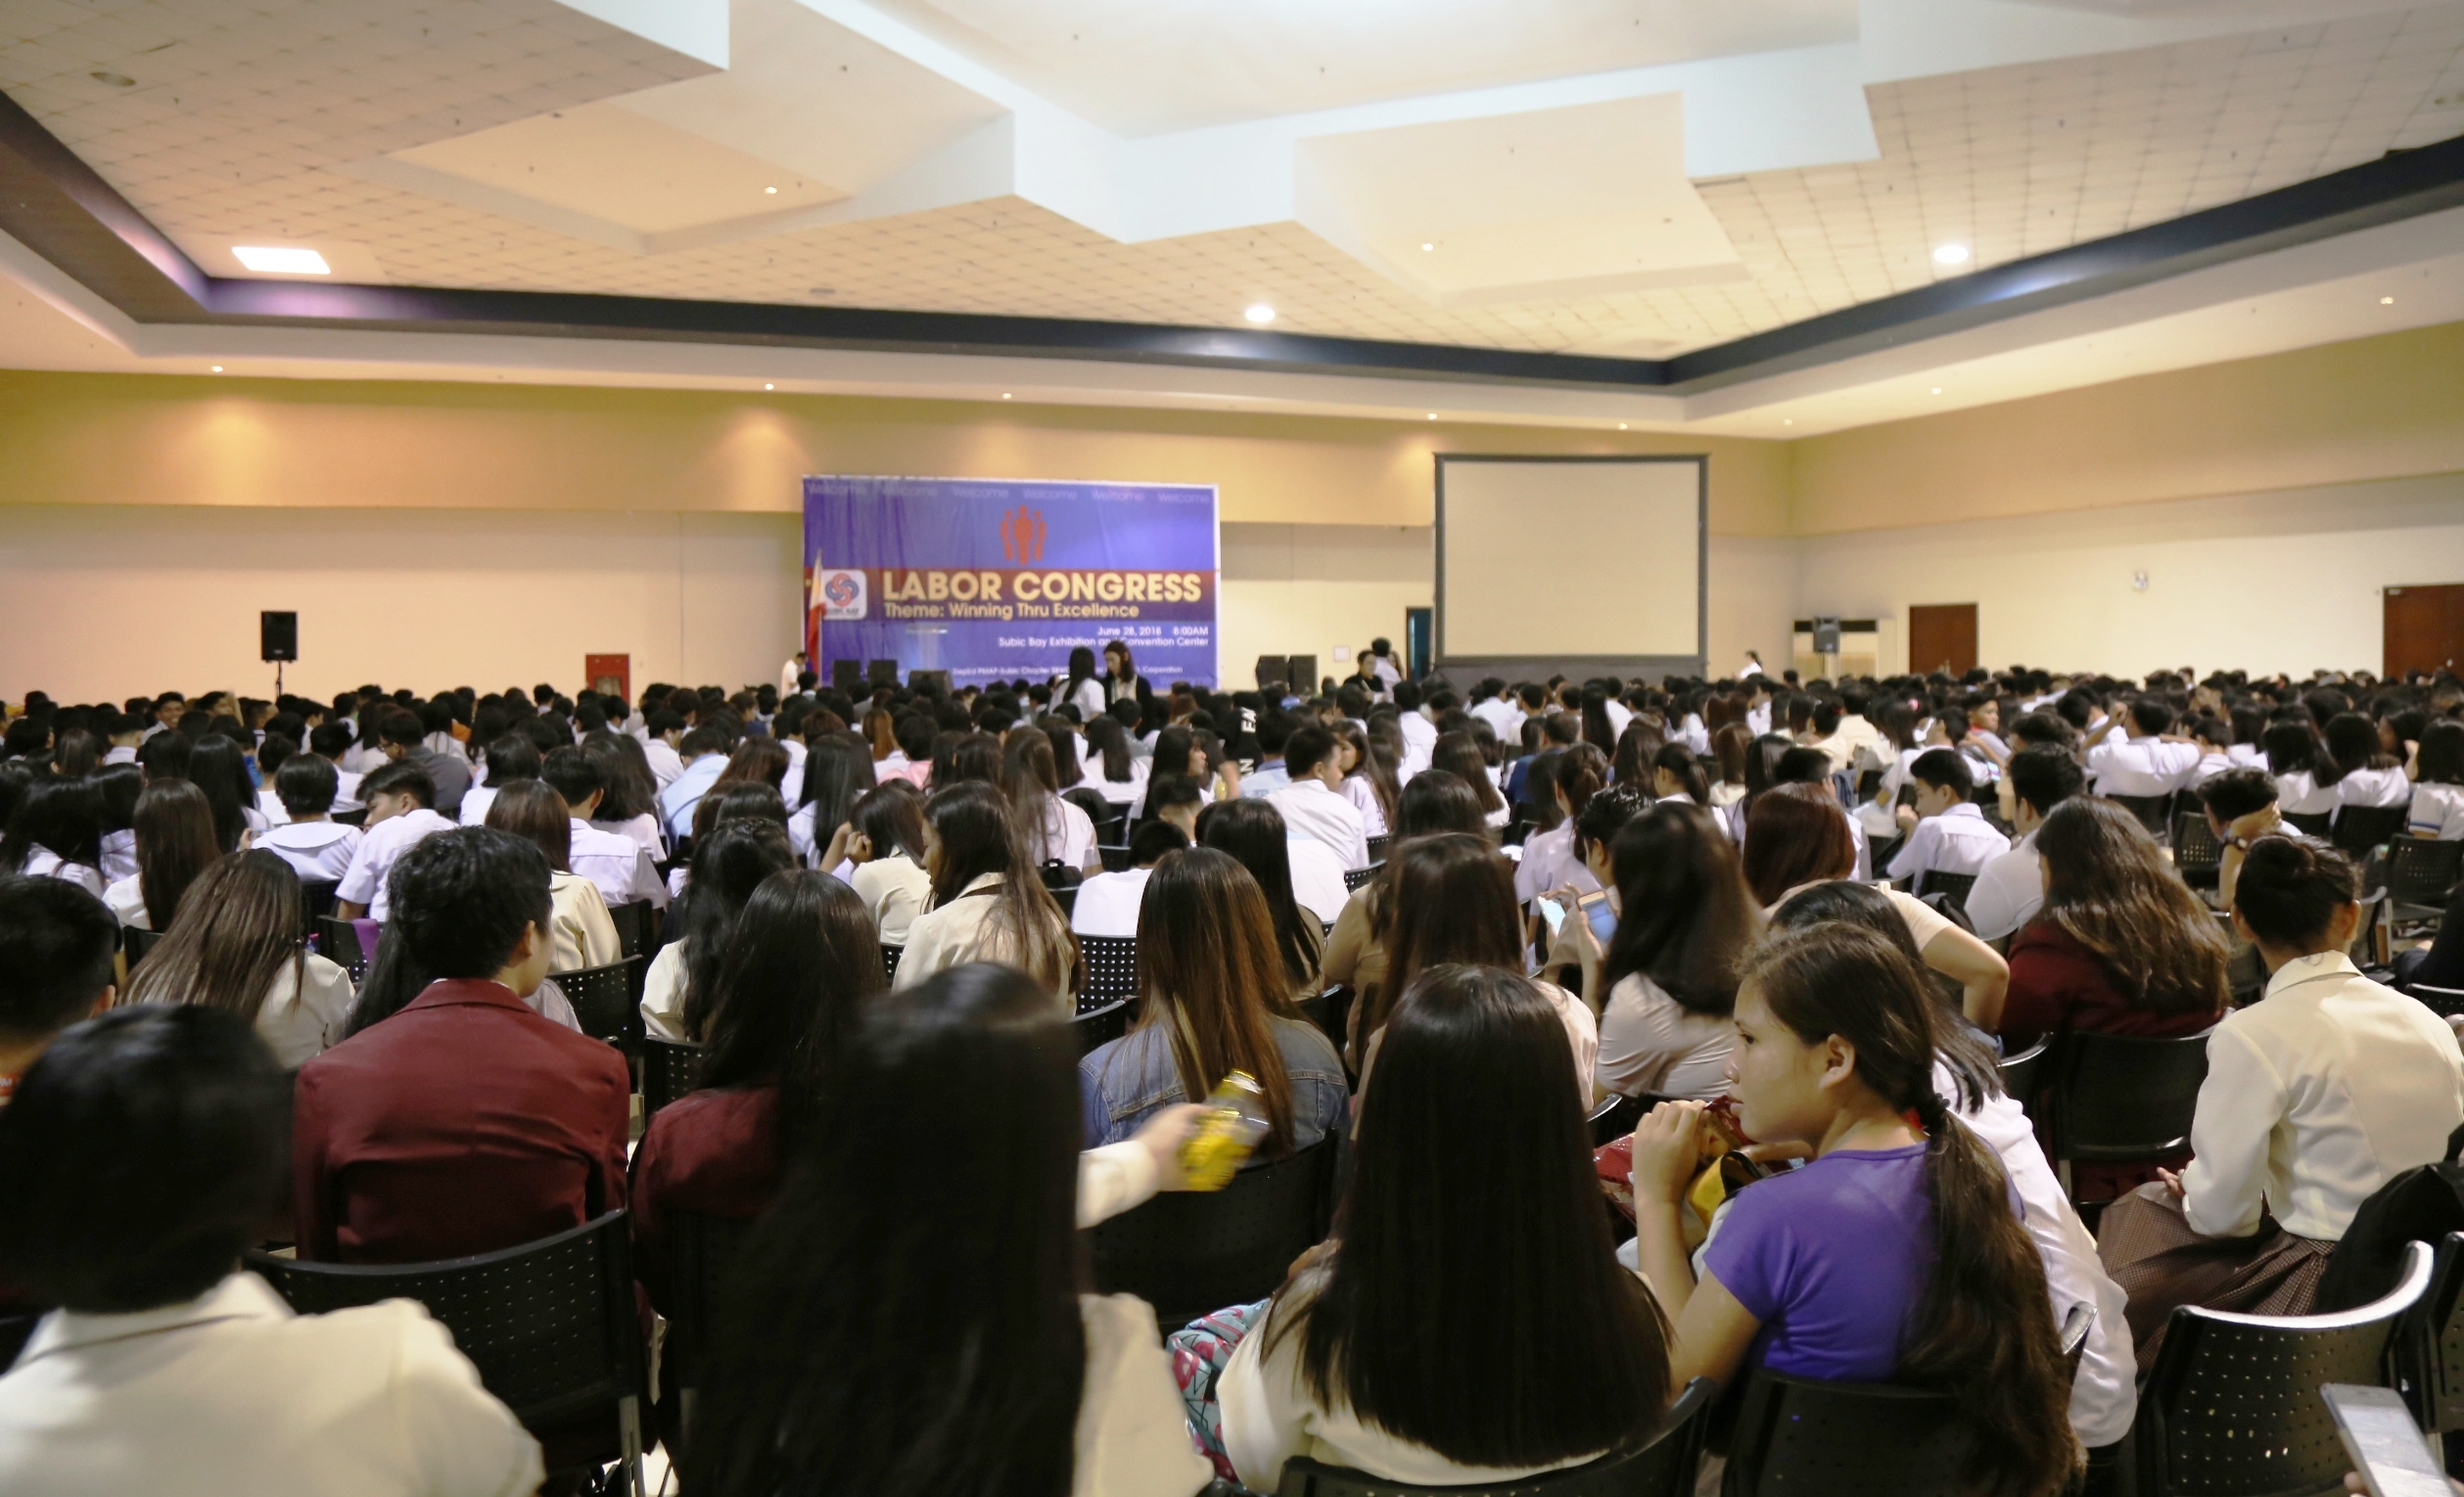 Business locators, students and teachers, as well as concerned government agencies attend the Labor Congress organized by the SBMA on June 28 at the Subic Bay Exhibition and Convention Center.